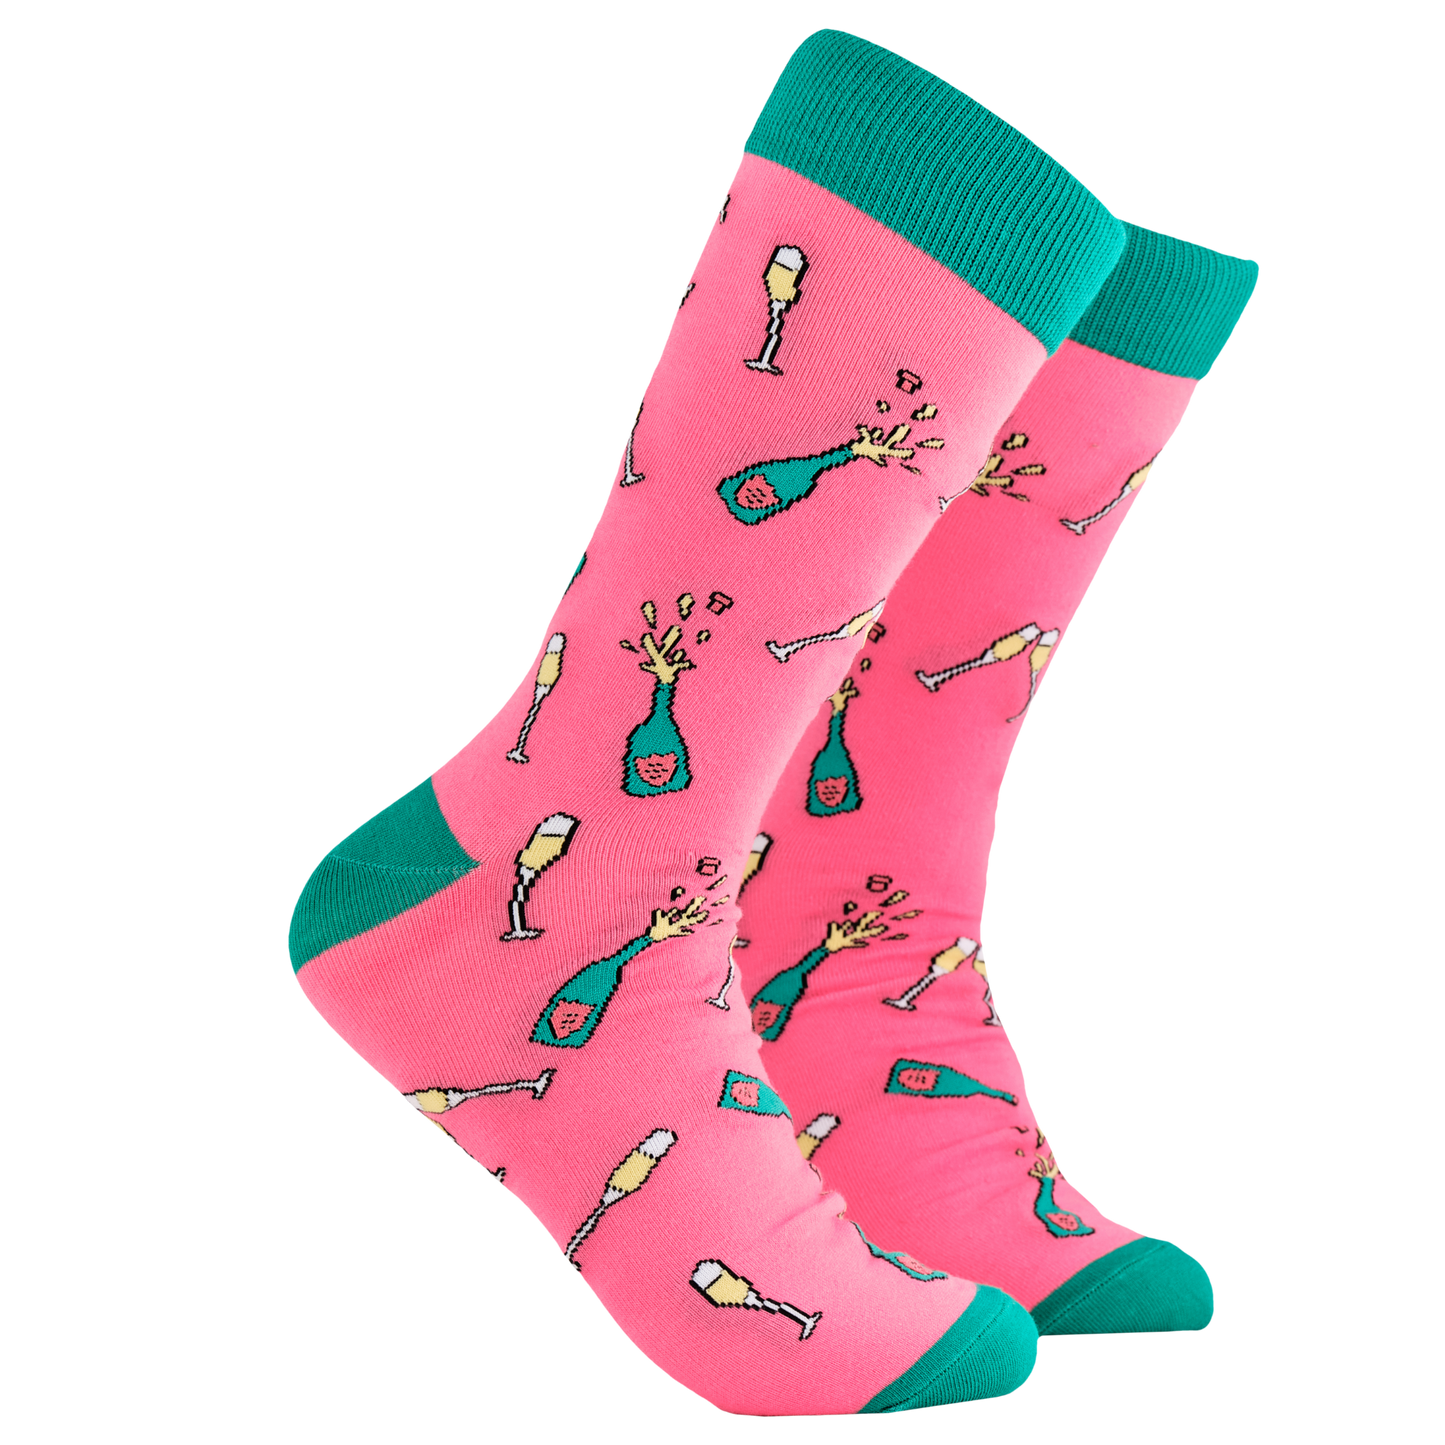 Champagne Socks - Champagne Problems. A pair of socks depicting champagne bottles and glasses. Pink legs, turquoise cuff, heel and toe.